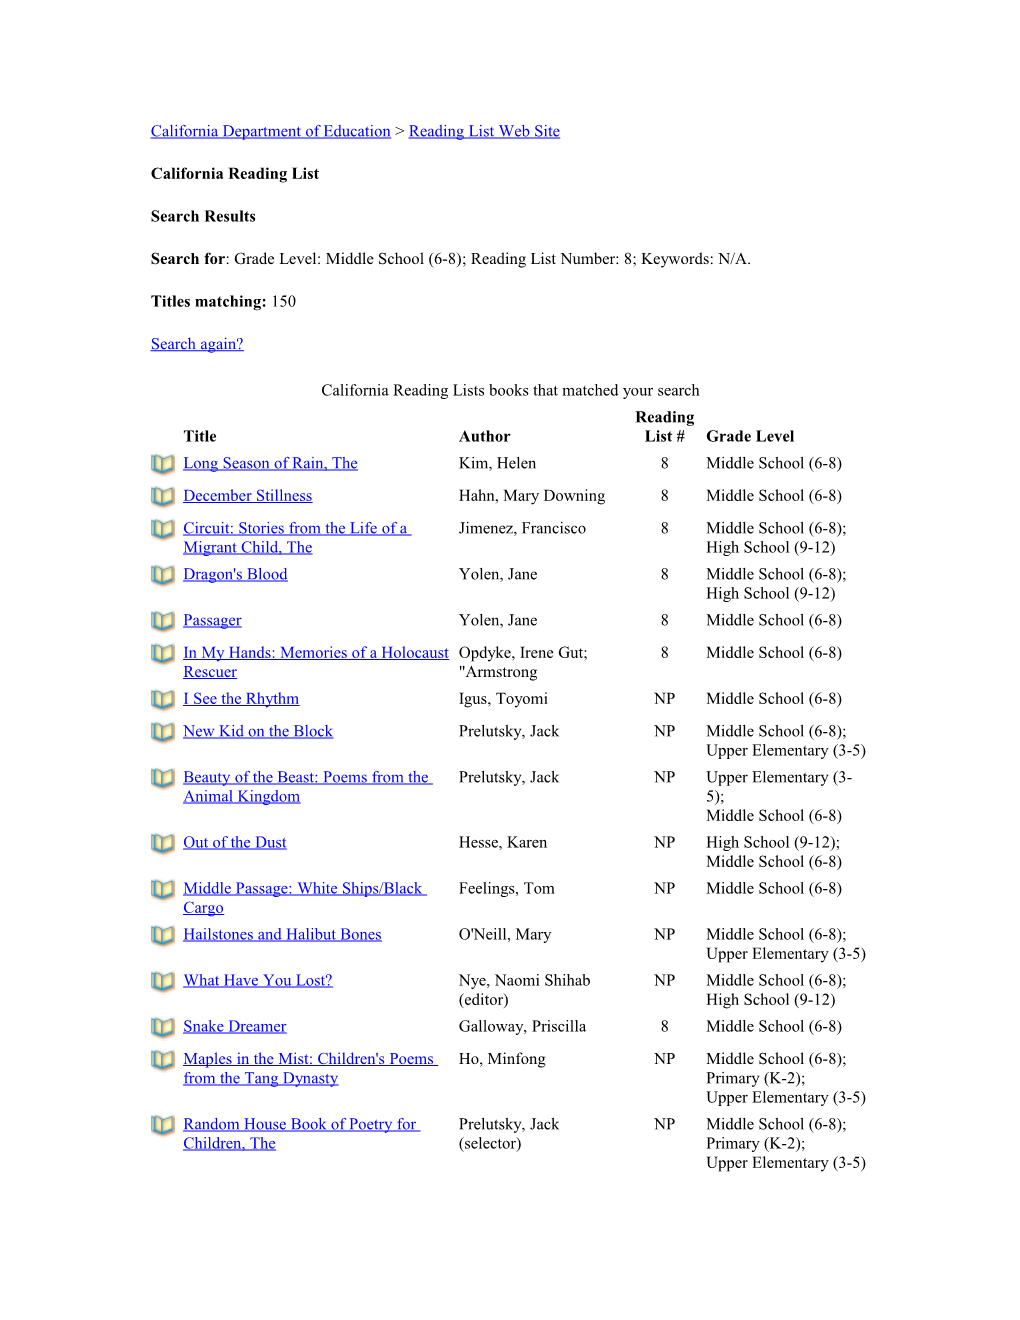 California Department of Education Reading List Web Site